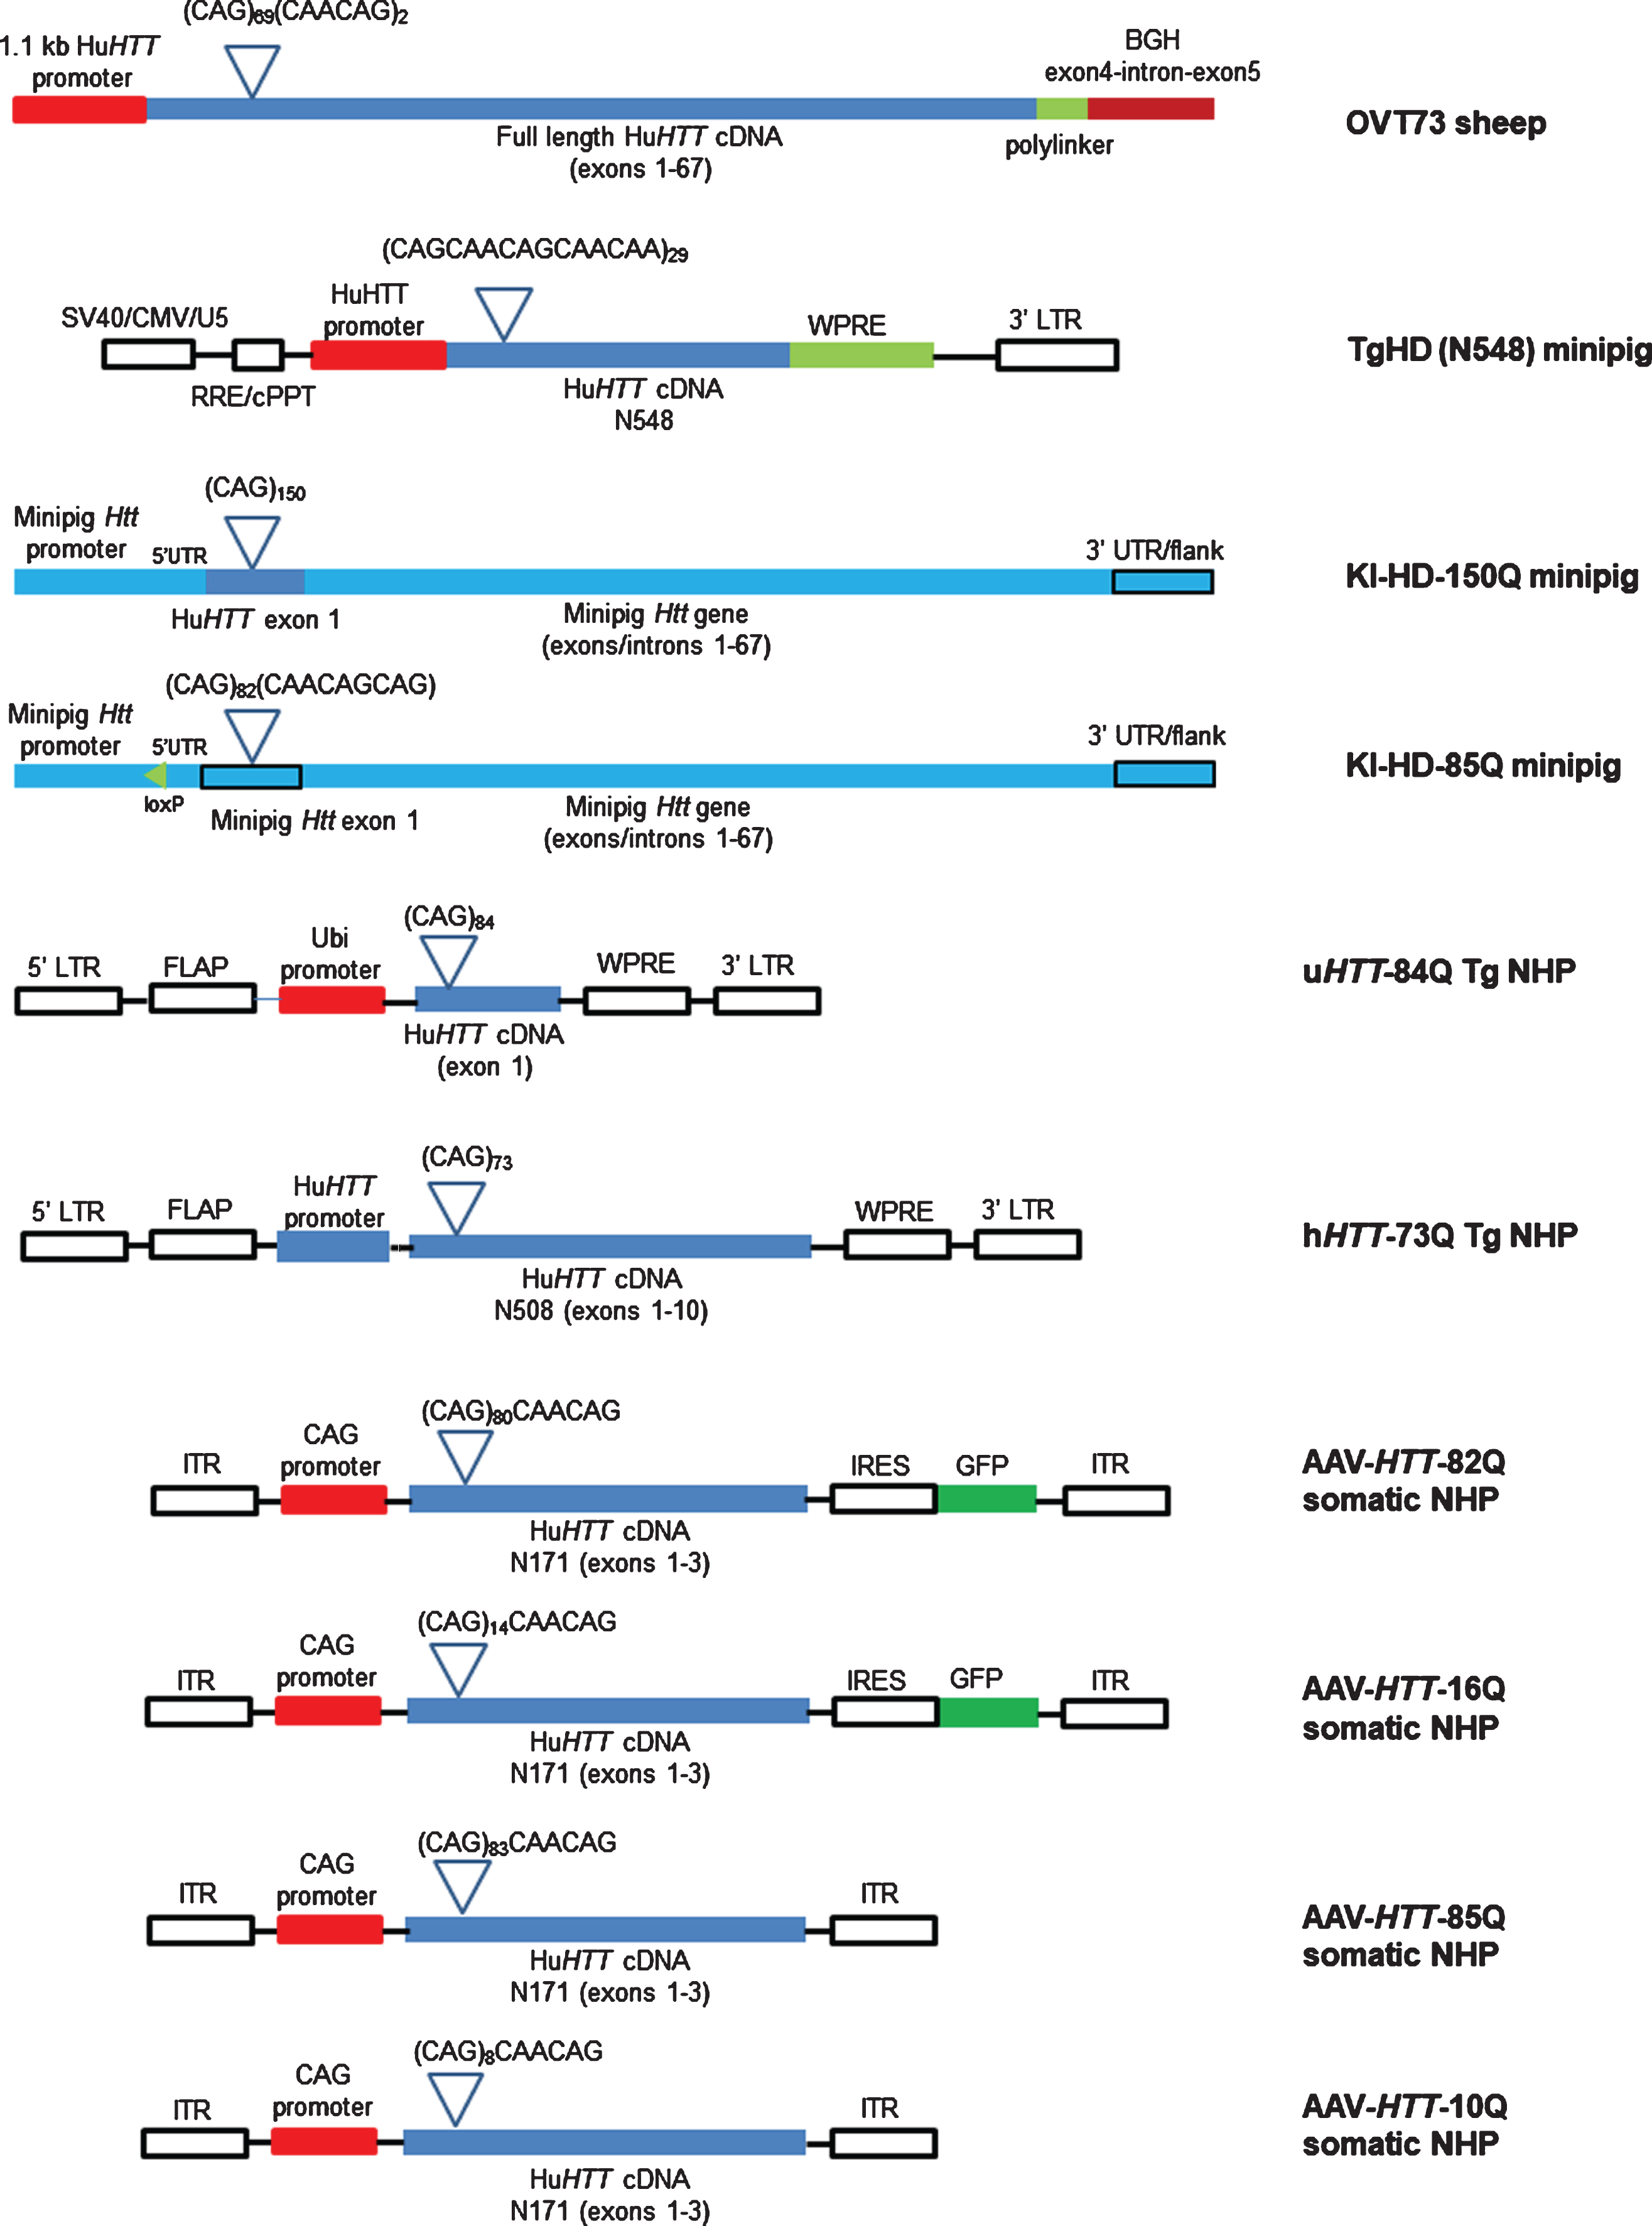 Schematic representations of HTT gene structures in the HD sheep, minipig and NHP models. Gene structures were derived from: OVT73 transgenic sheep [10]; TgHD (N548) transgenic minipig [43]; KI-HD-150Q minipig [53]; KI-HD-85Q minipig (Exemplar Genetics personal communication and D. Howland; this article); transgenic NHP models: uHTT-84Q and hHTT-73Q [67]; and the somatic NHP AAV-HTT-82/85Q and AAV-HTT-16/10Q (J. Mcbride; this article) [73]. Lentiviral and AAV DNA vector elements are depicted in open white squares. BGH, bovine growth hormone; UTR, untranslated region; GFP, green fluorescence protein; Ubi (promoter), ubiquitin; CAG (promoter), cytomegalovirus early enhancer element/promoter-first exon-first intron of chicken B-actin gene/splice acceptor of rabbit B-globin gene; SV40/CMV/U5, simian virus 40, cytomegalovirus, unique 5; RRE/cPPT, rev response element, central polypurine tract; LTR, long terminal repeat; FLAP, a 3-stranded DNA structure; WPRE, Woodchuck Hepatitis Virus Posttranscriptional Regulatory Element; IRES, internal ribosome entry site; ITR, inverted terminal repeat.